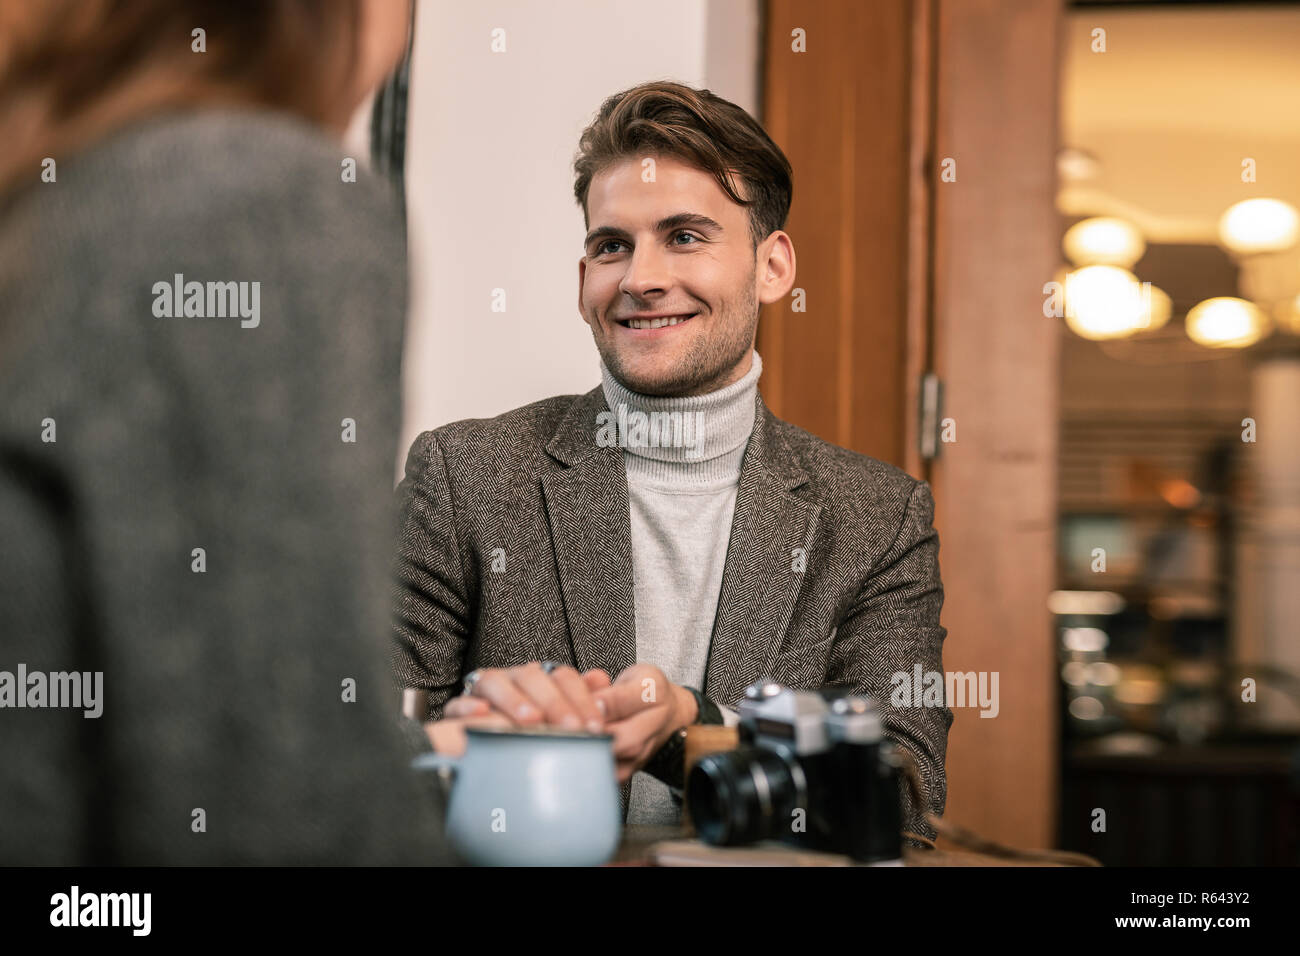 Smiling man talking with the woman in the cafe Stock Photo